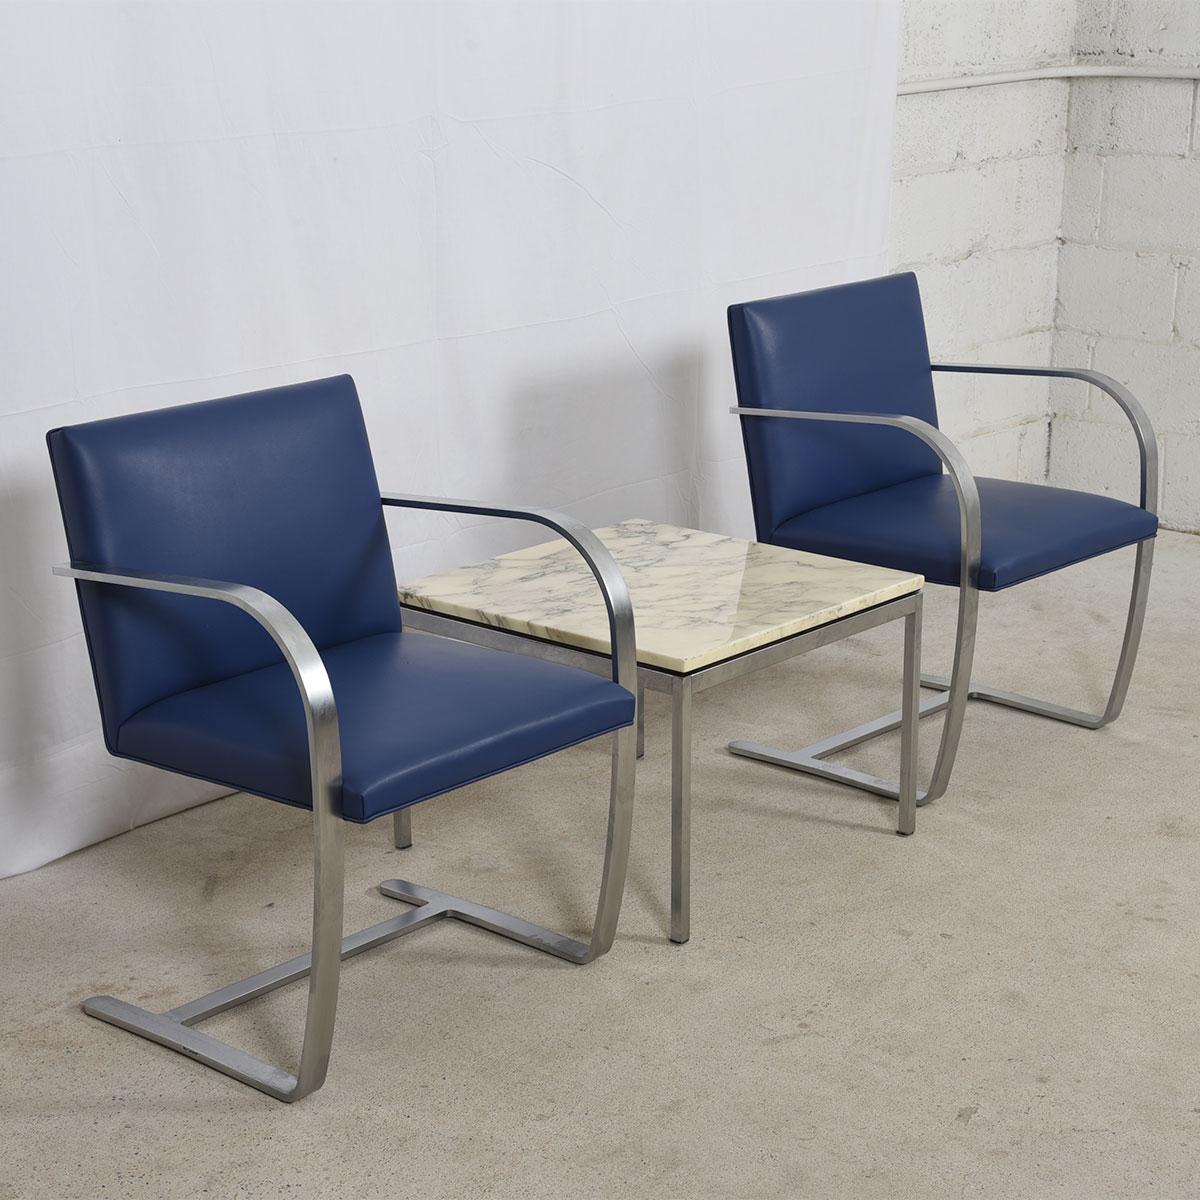 Pair of Stainless Steel Flat Bar Brno Chairs with Cadet Blue Leather Upholstery For Sale 1